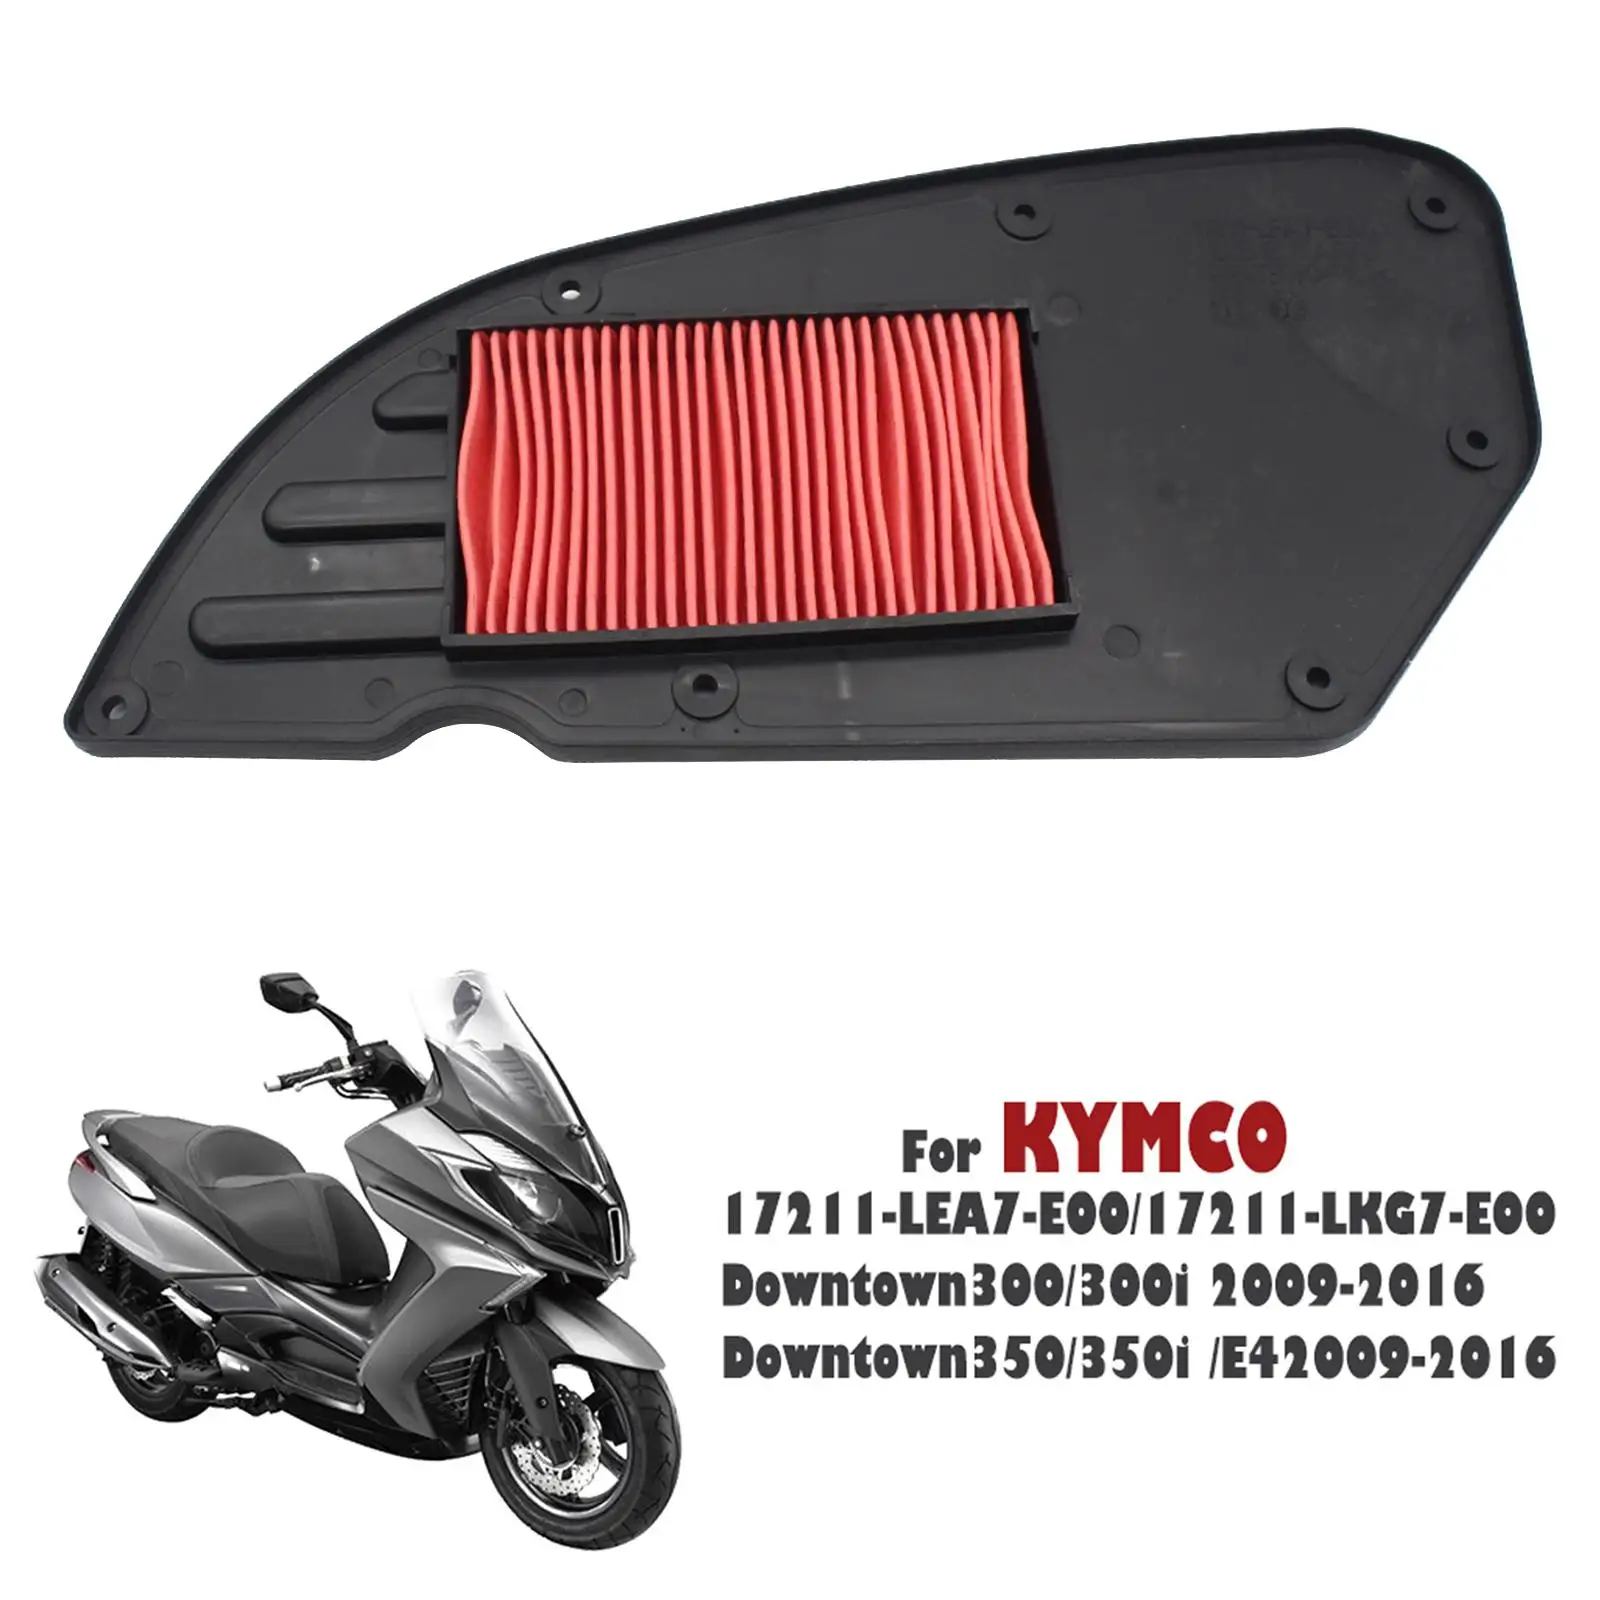 Motorcycle Air Filter Cleaner Fit for Kymco Downtown 300 300i 09-16 17211-Lkg7-E00 ACC Replacement Spare Parts